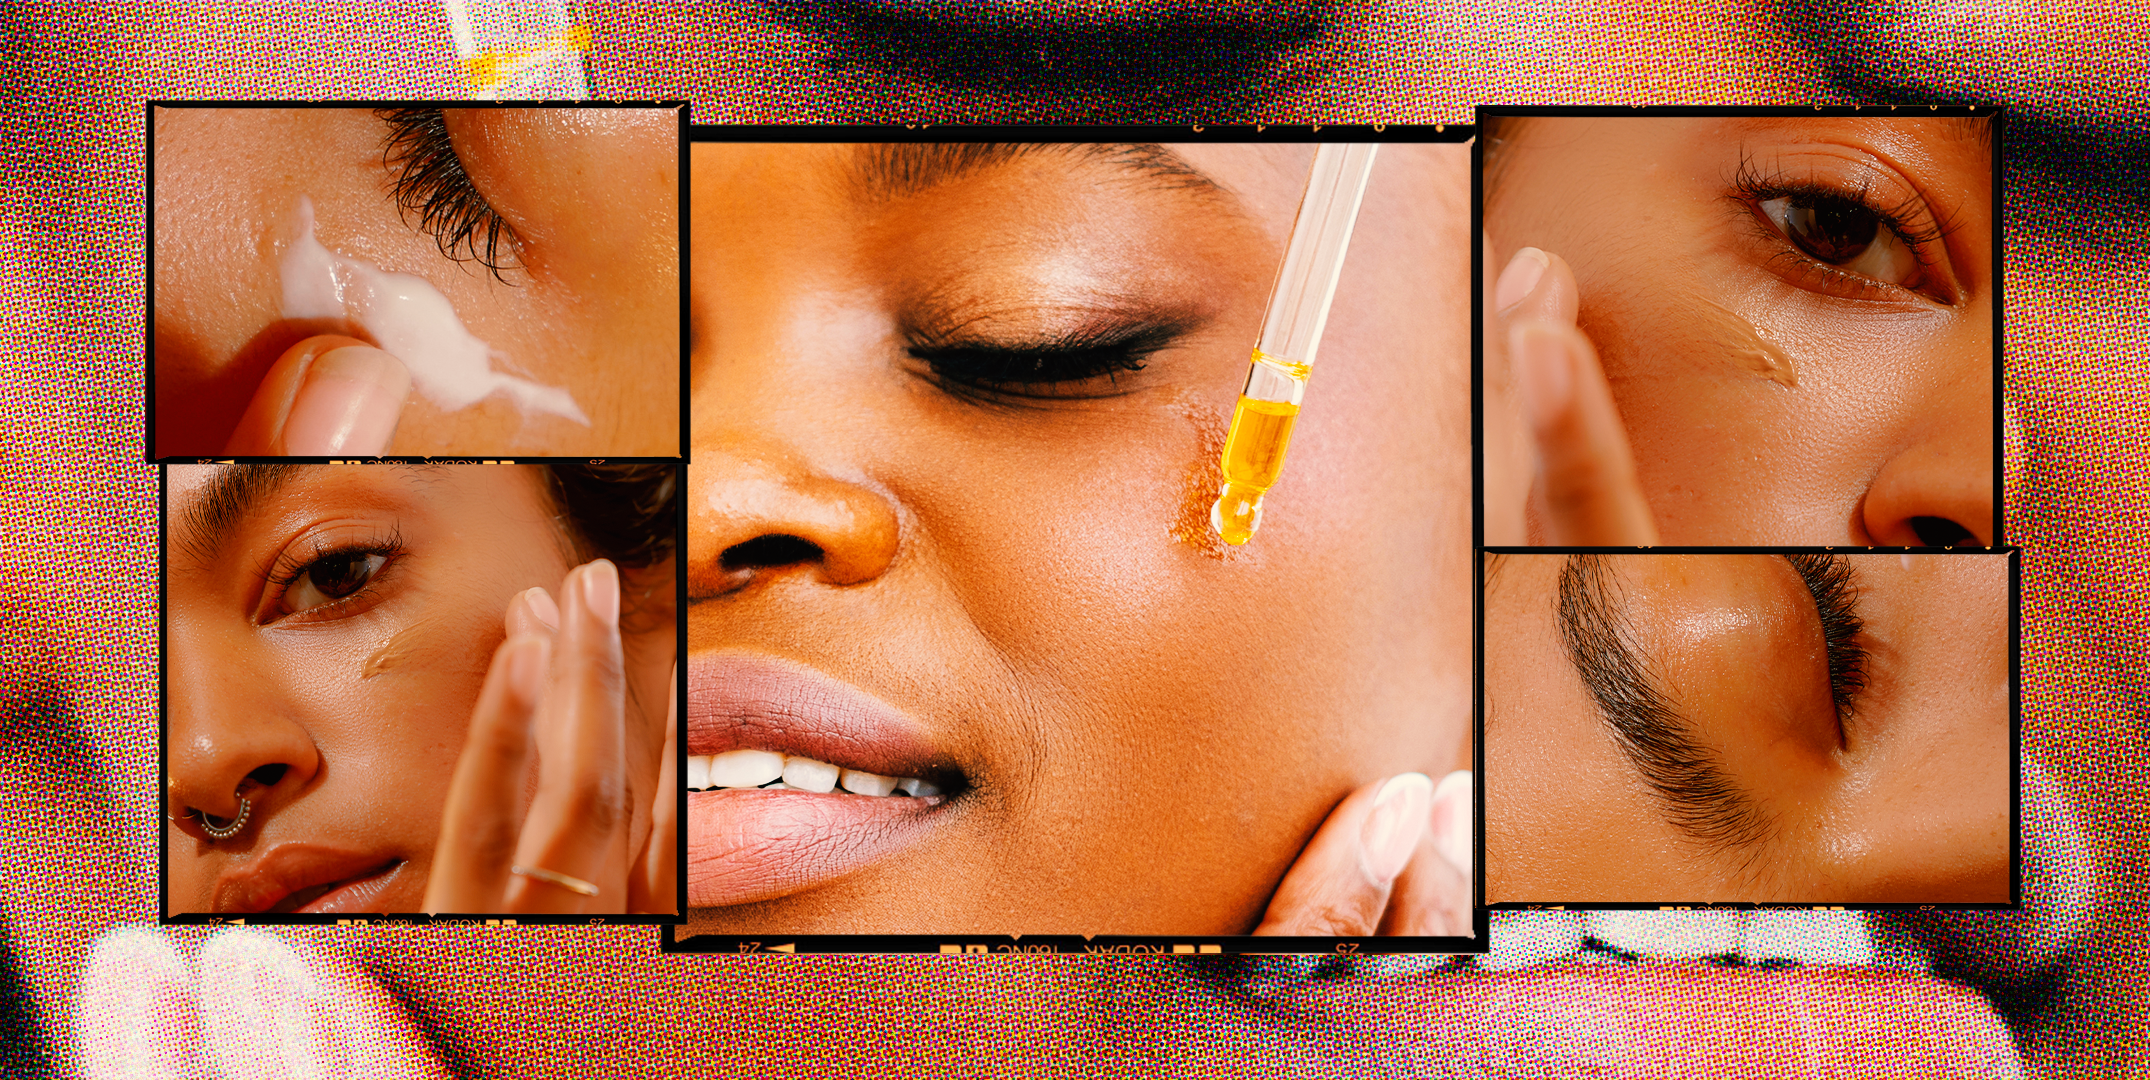 How to Use Vitamin C and Retinol in Your Skincare Routine